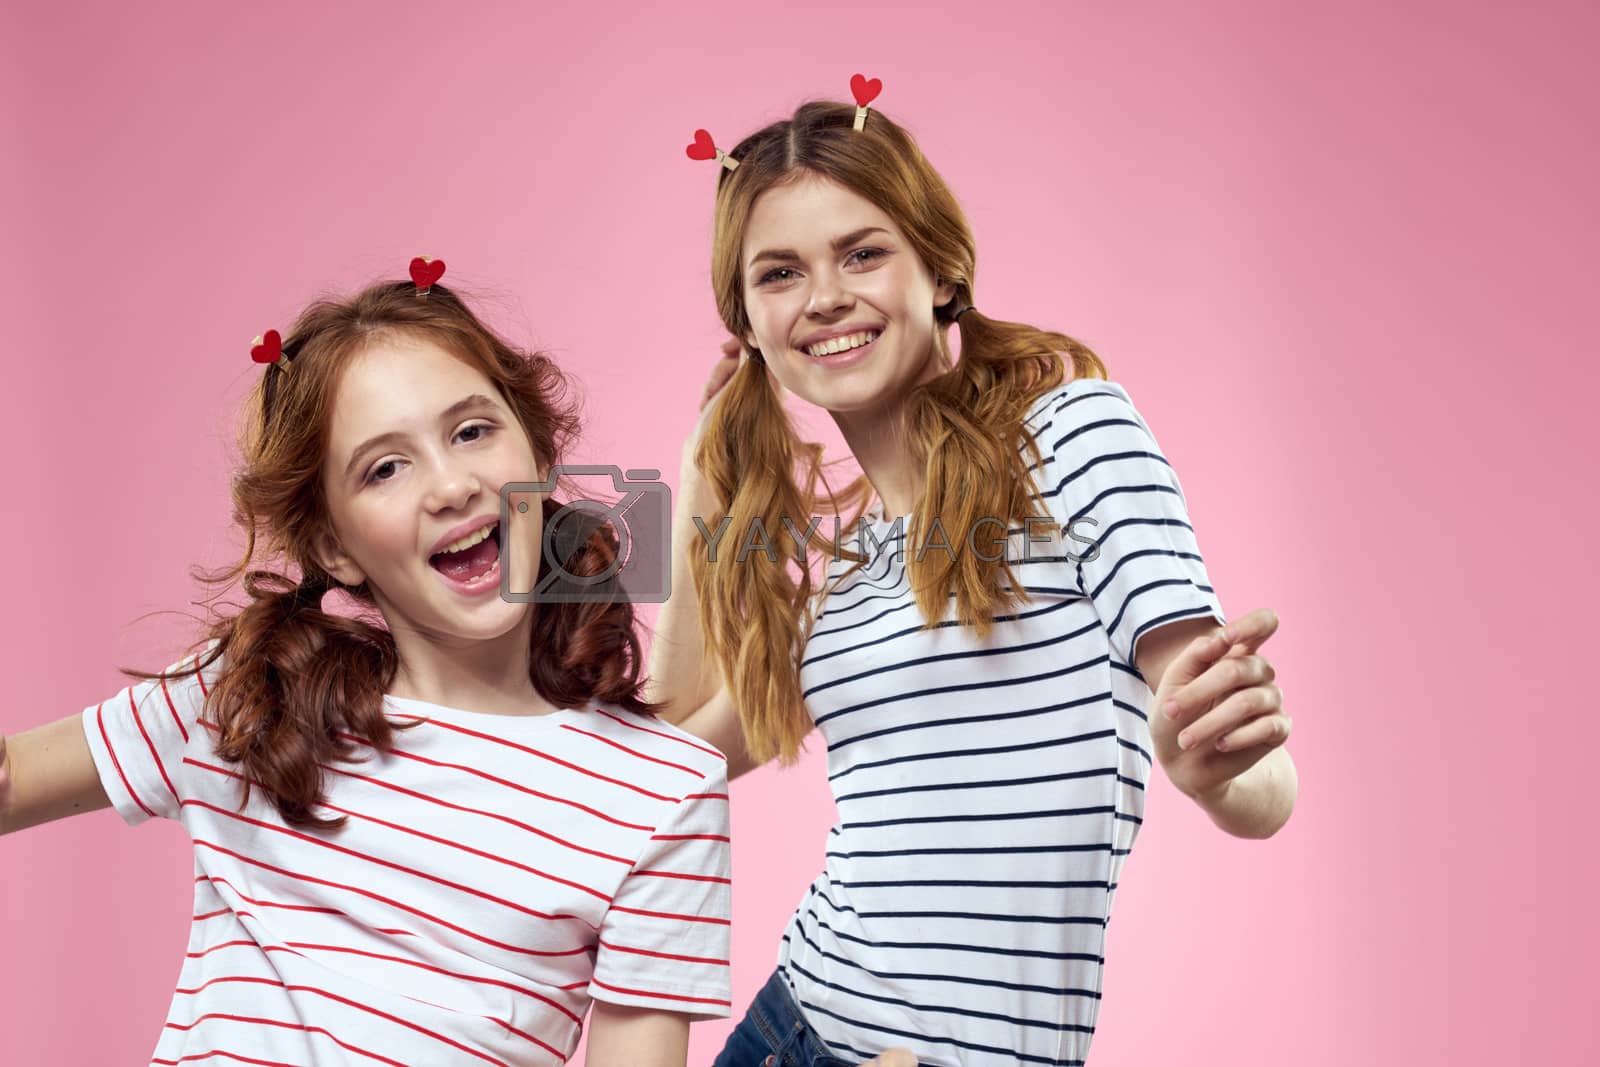 Cheerful mom and daughter lifestyle joy striped shirts family pink background. High quality photo